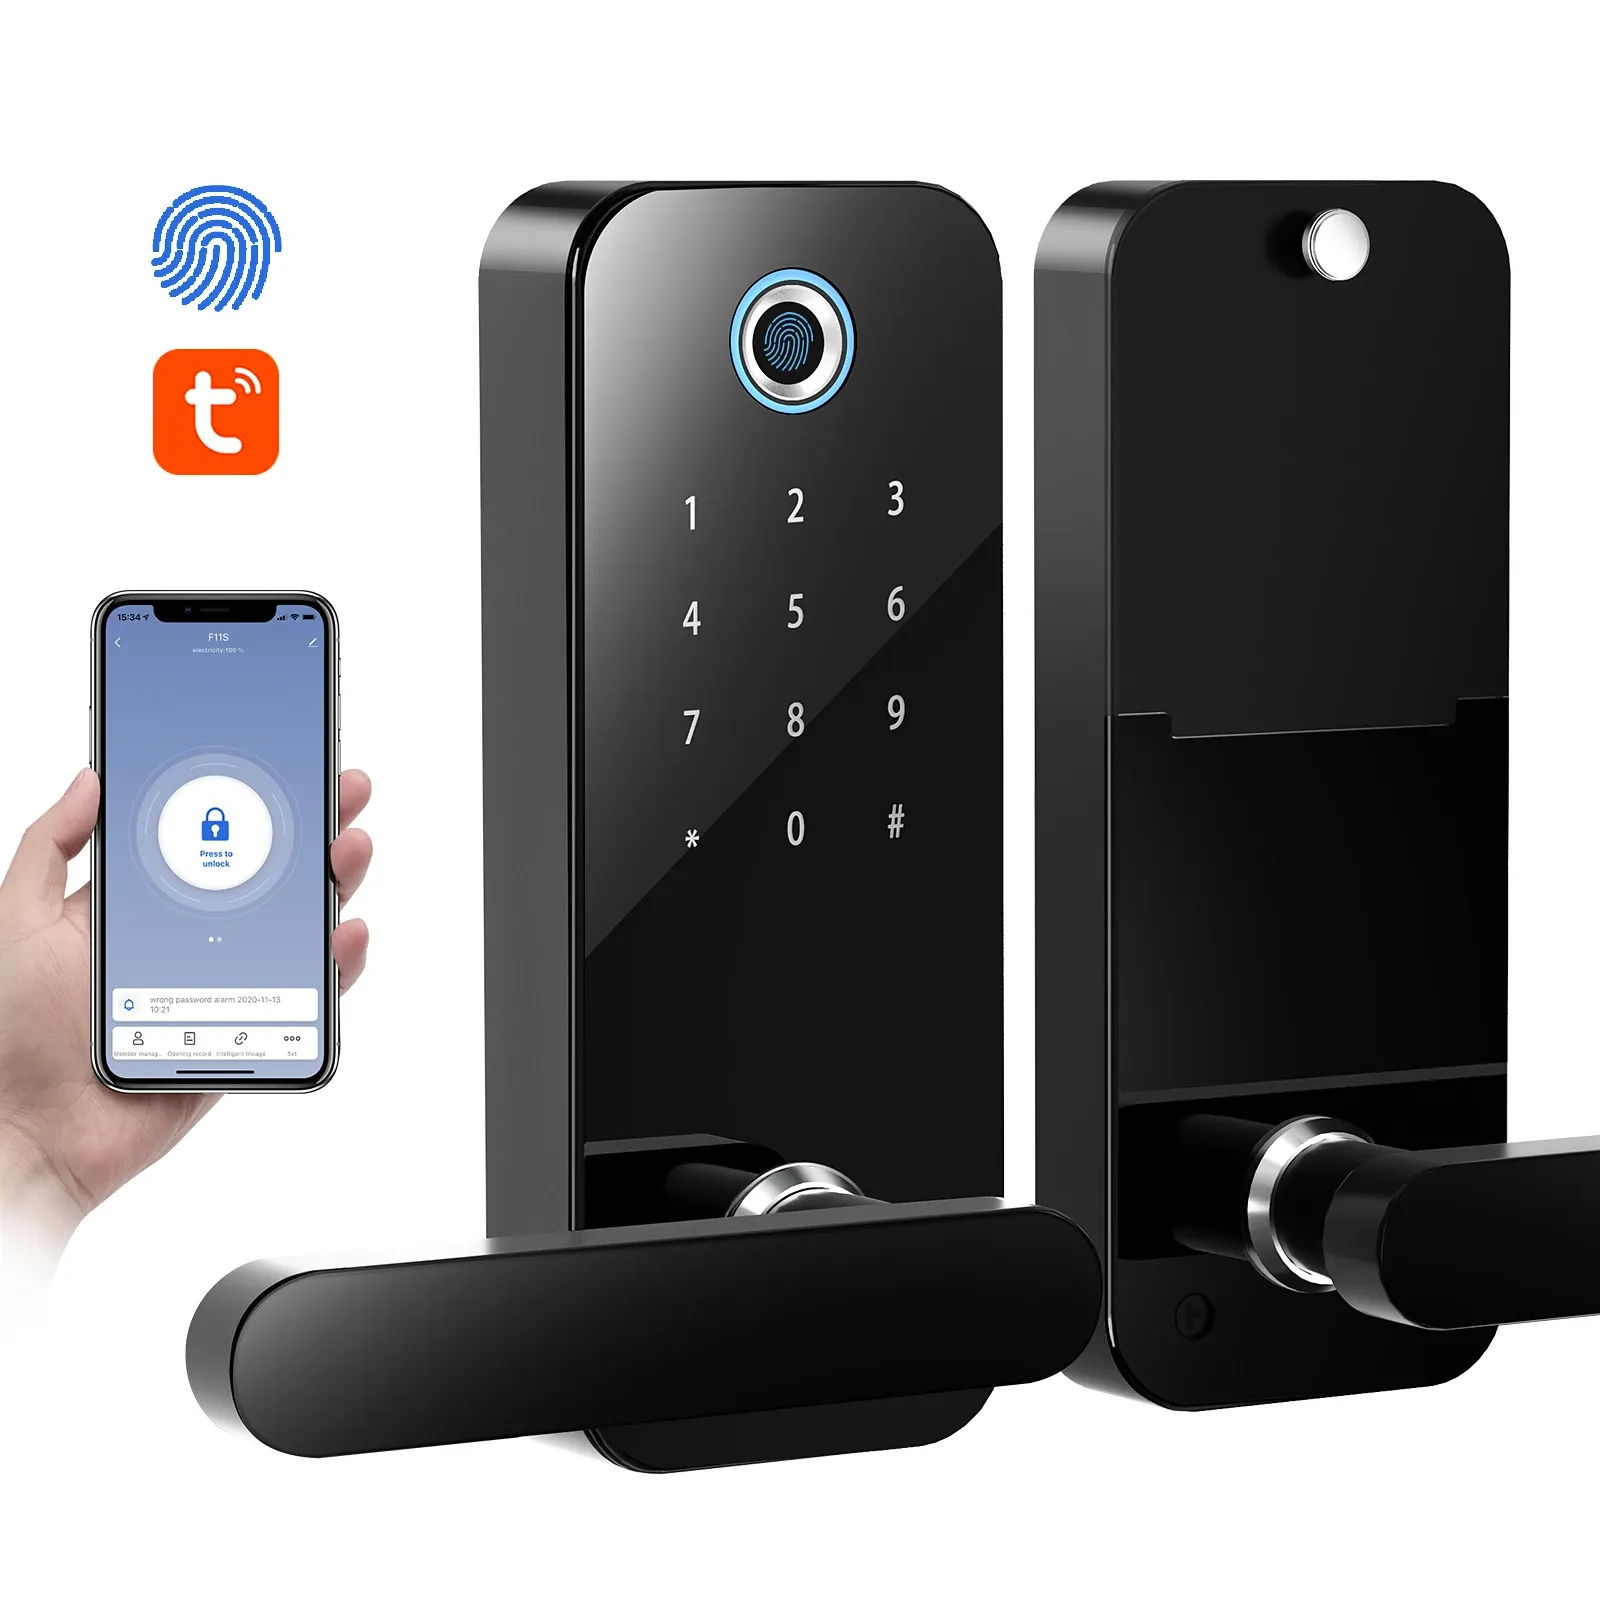 Lock Support tuya smart and smart life with gateway support ALEXA and Google assistant home office smart lock